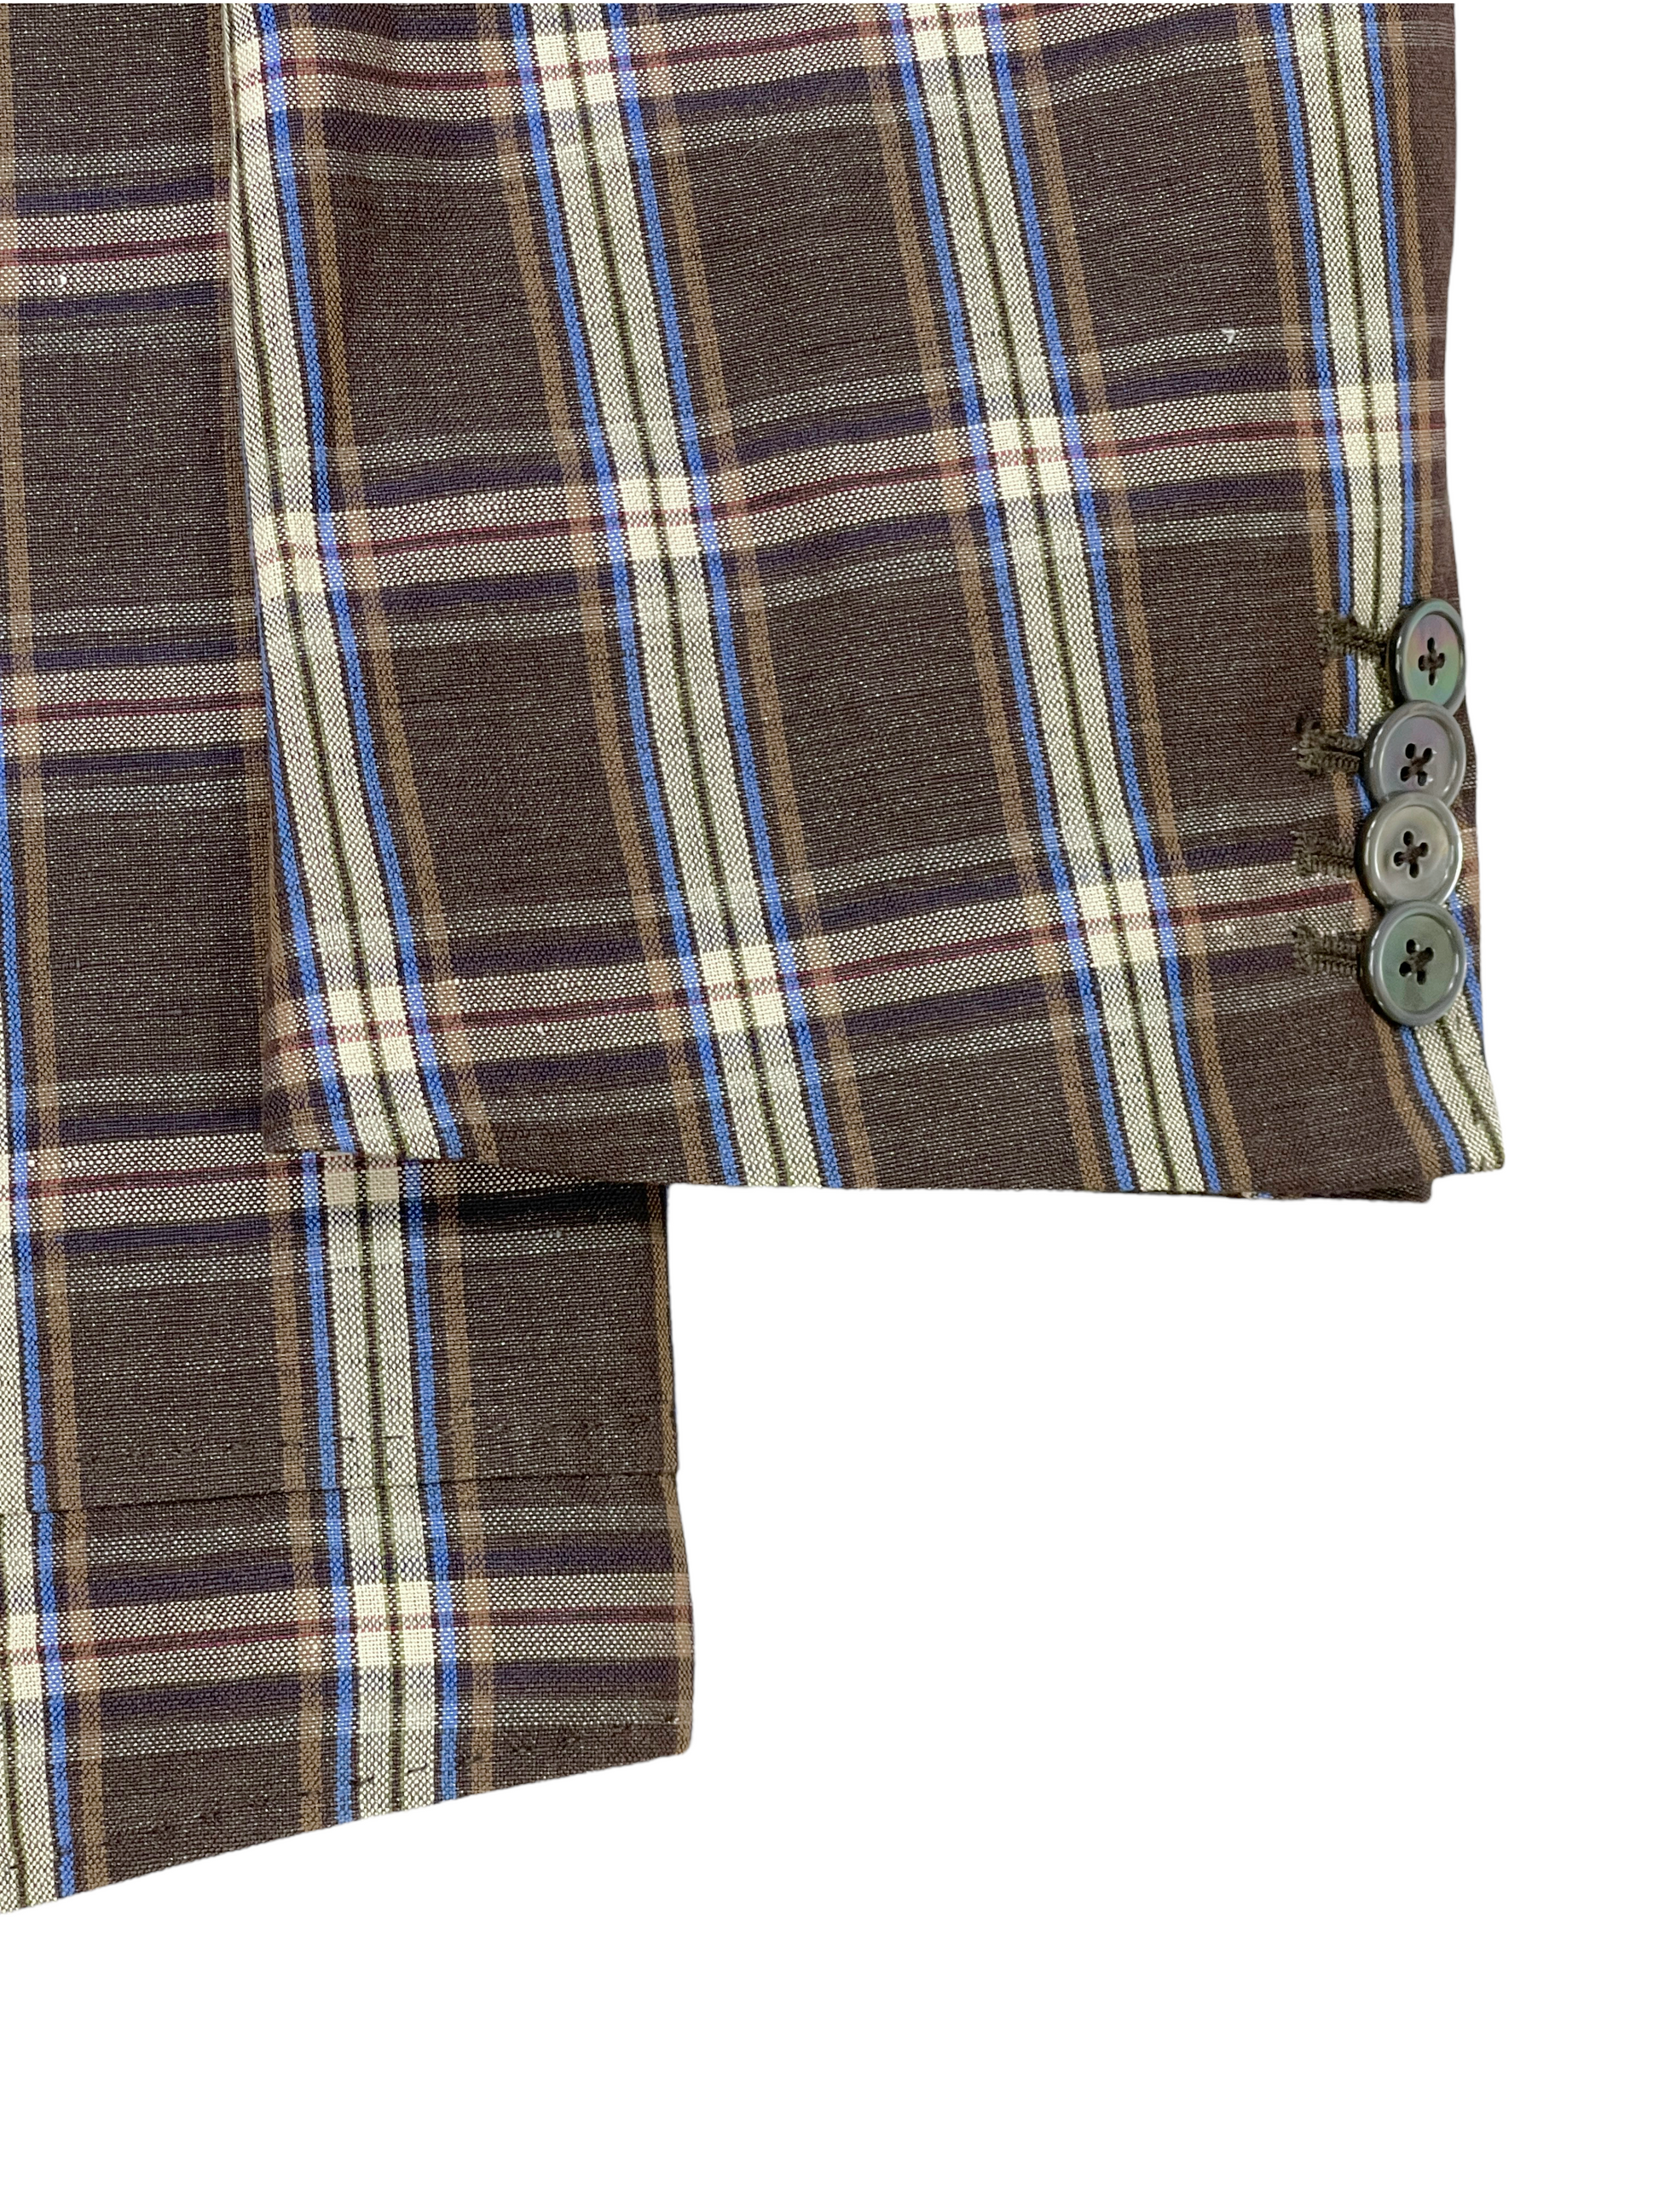 J. Lindeberg Brown Blue Windowpane Plaid Unlined Sport Jacket 44R - Genuine Design Luxury Consignment for Men. New & Pre-Owned Clothing, Shoes, & Accessories. Calgary, Canada